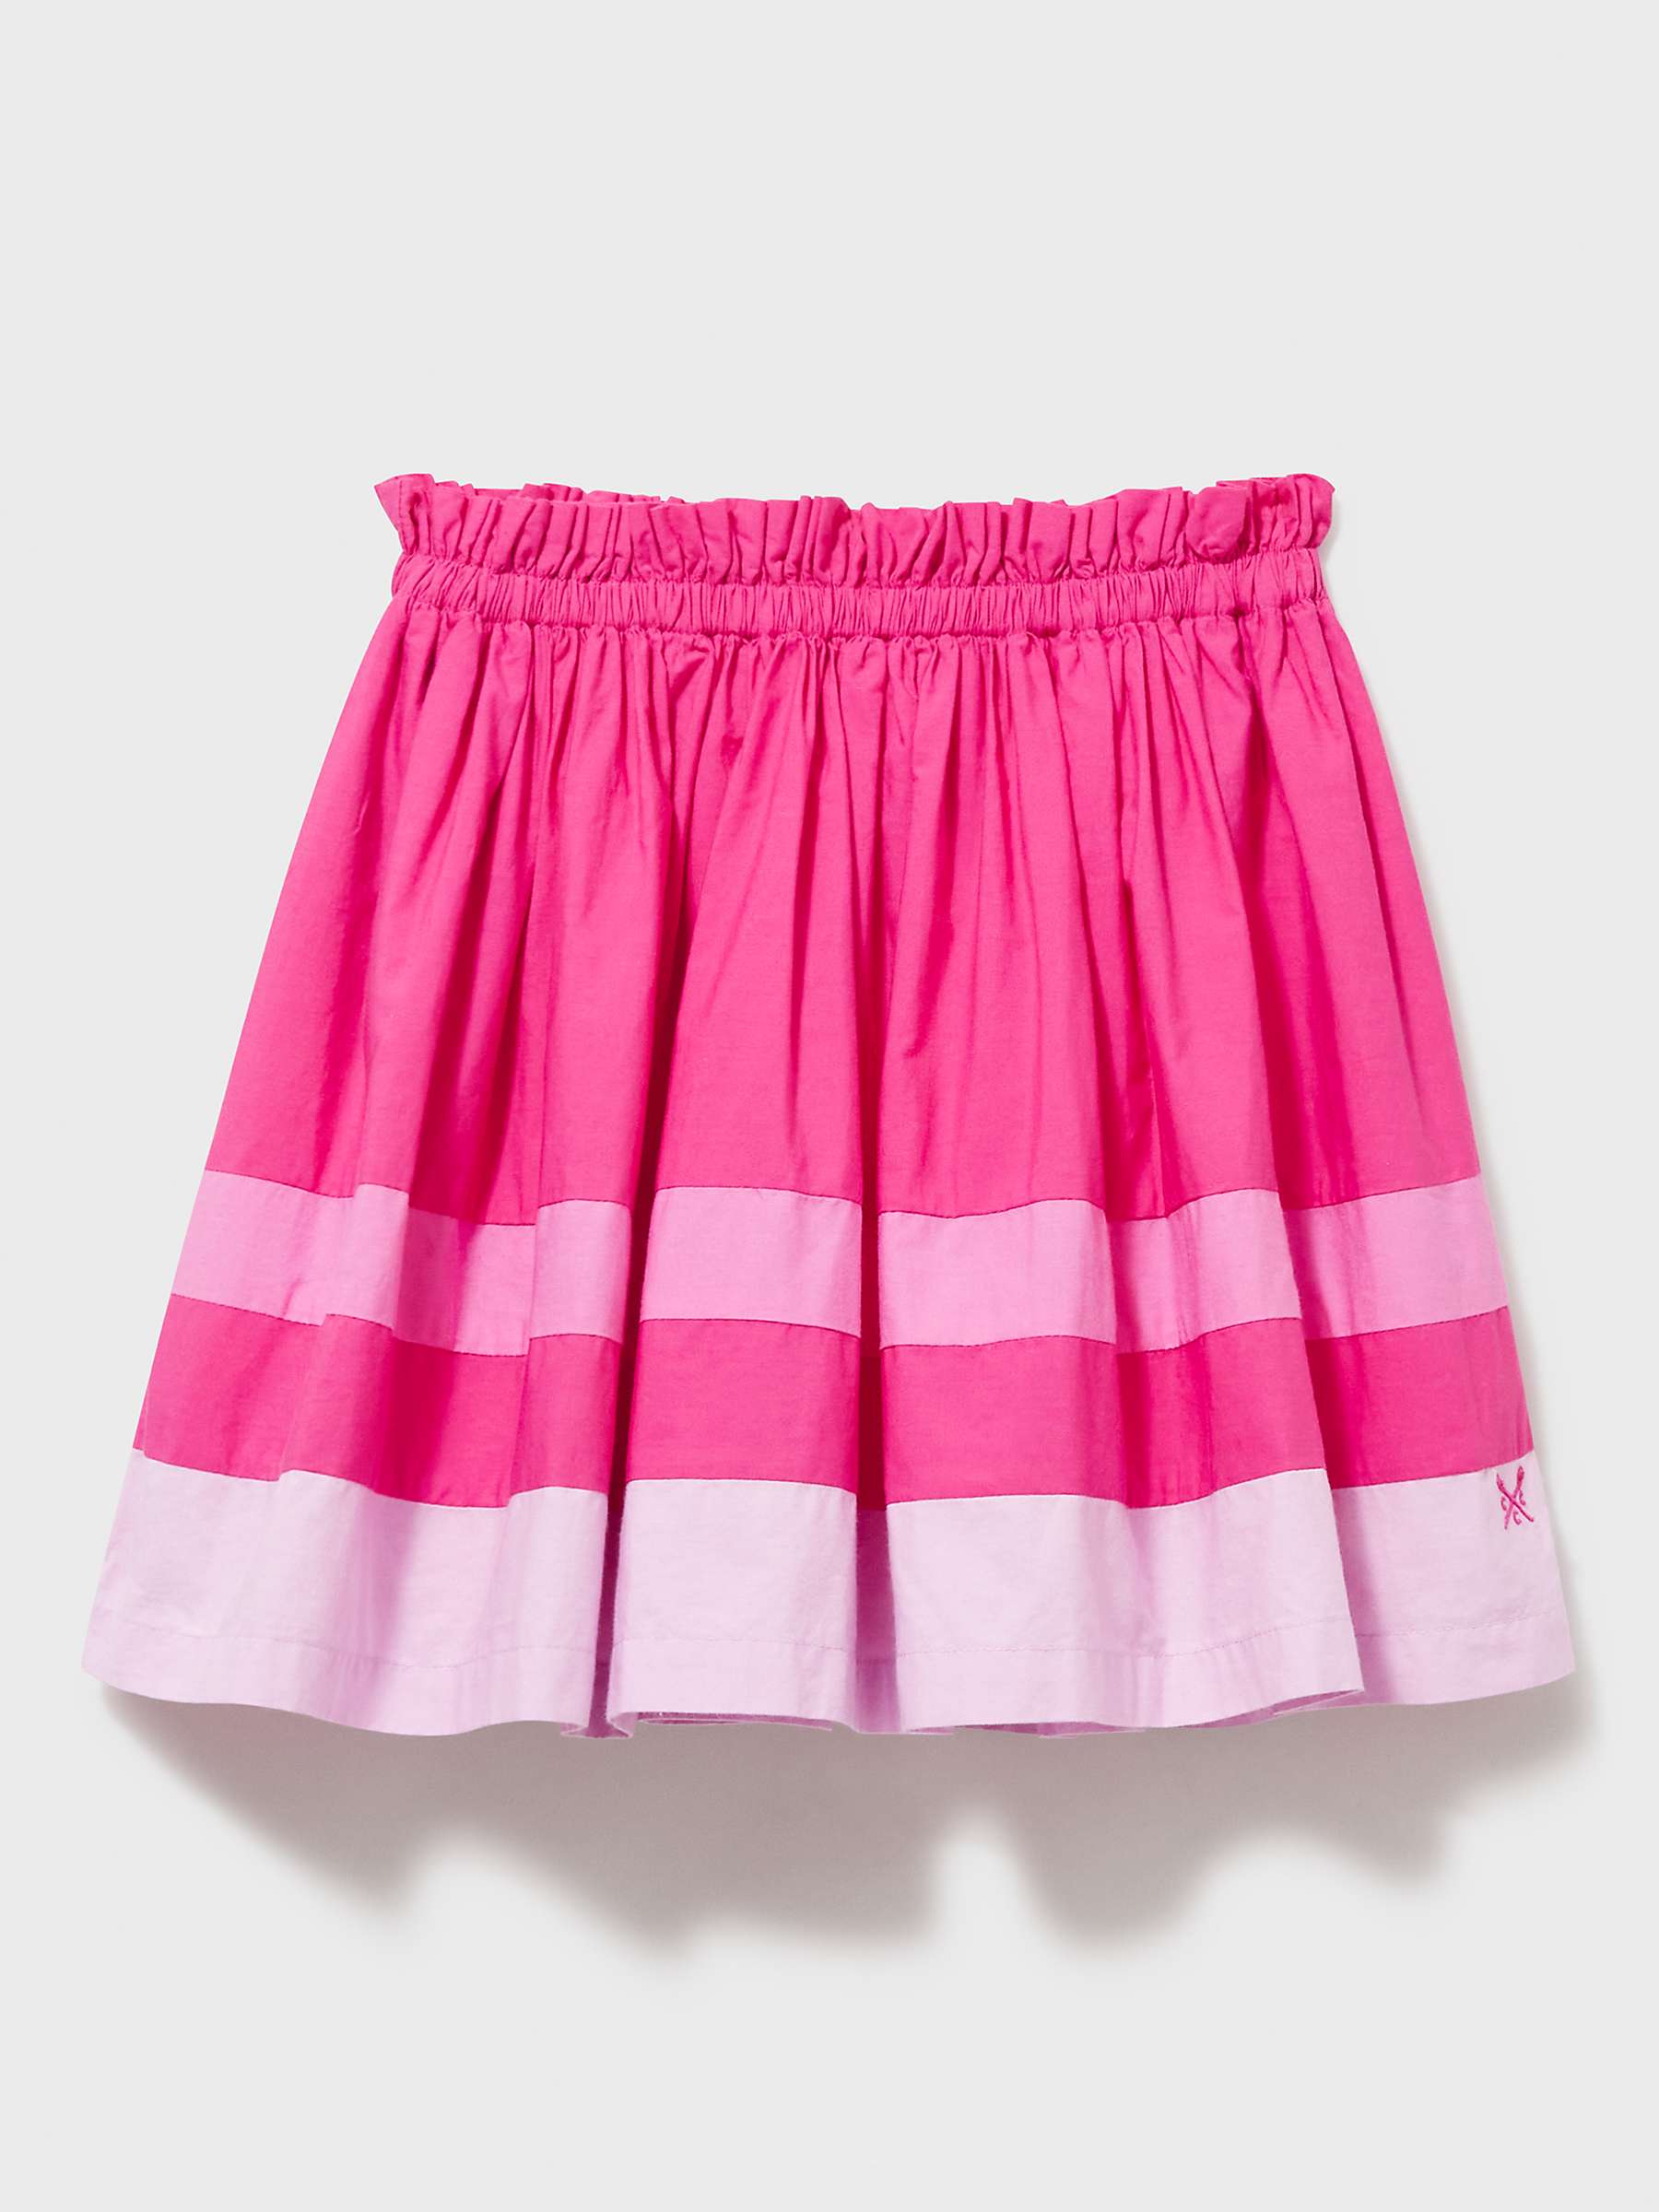 Buy Crew Clothing Kids' Colour Block Skirt, Bright Pink Online at johnlewis.com